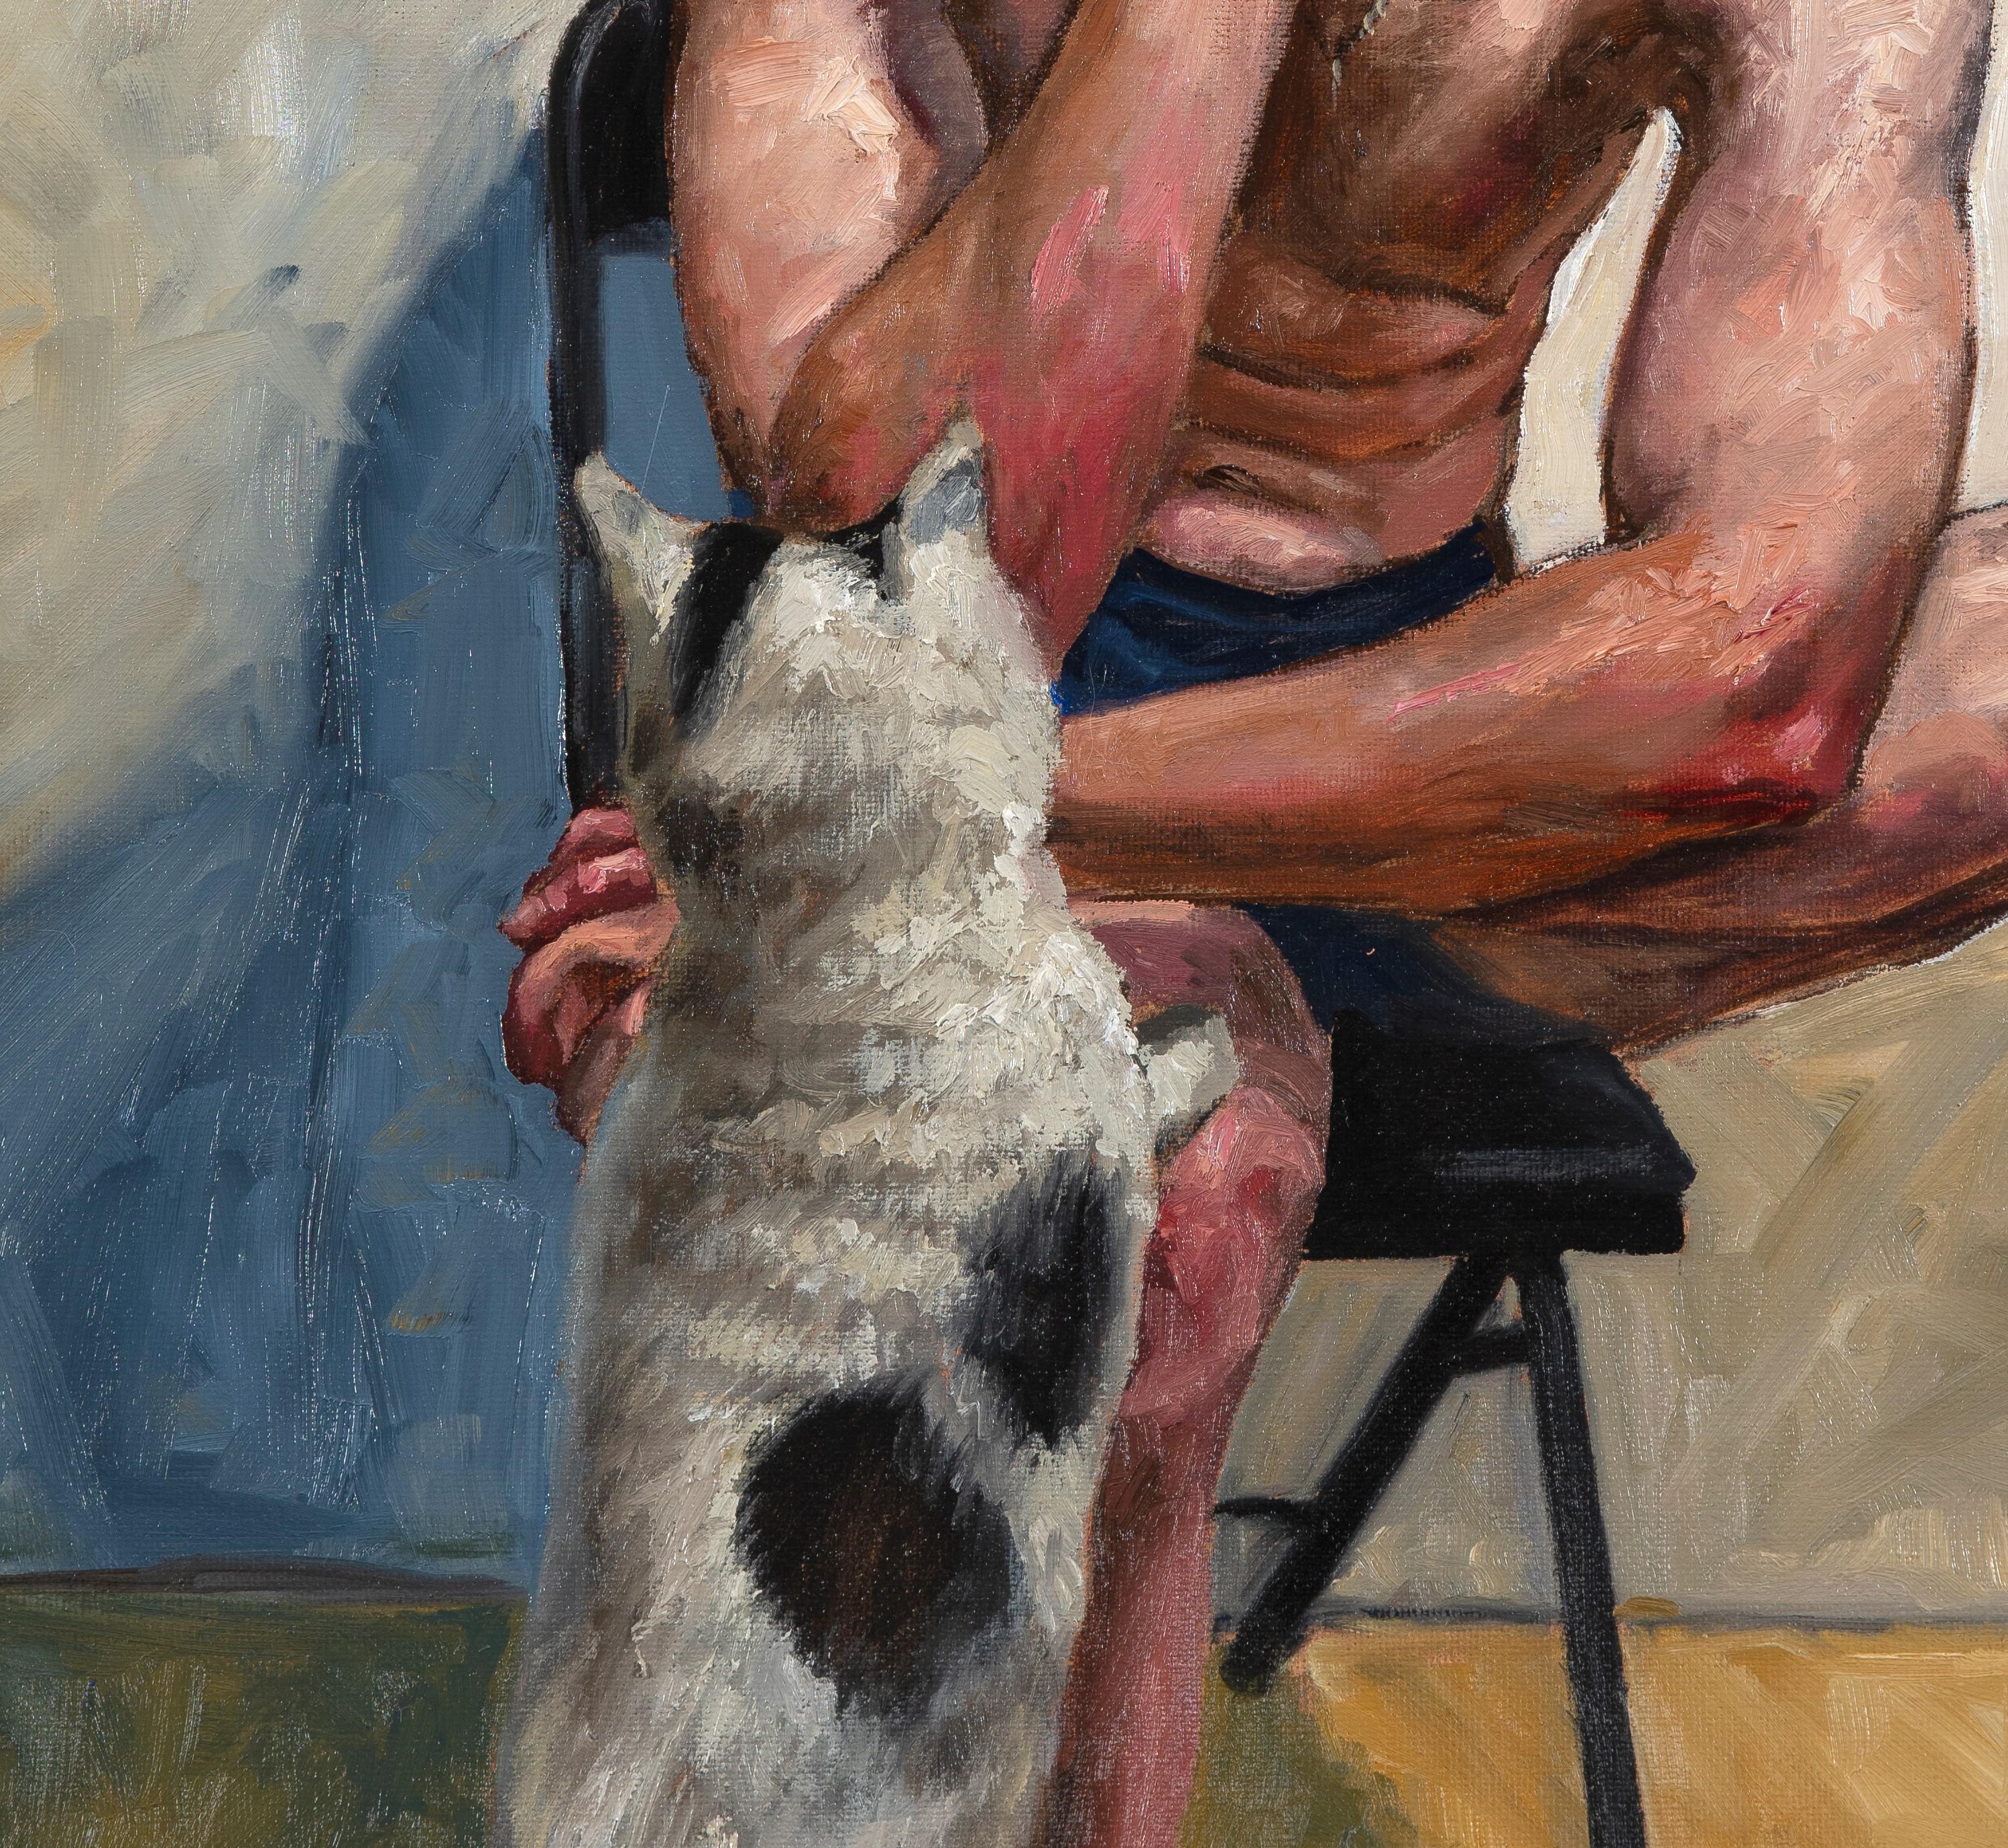 An always available and willing subject, the artist paints himself in this completely relaxed pose.  With his favorite studio companion, his cat Gattone and a cigarette, Lupkin uses loose brushwork, heavy paint and a warm palette to create this very